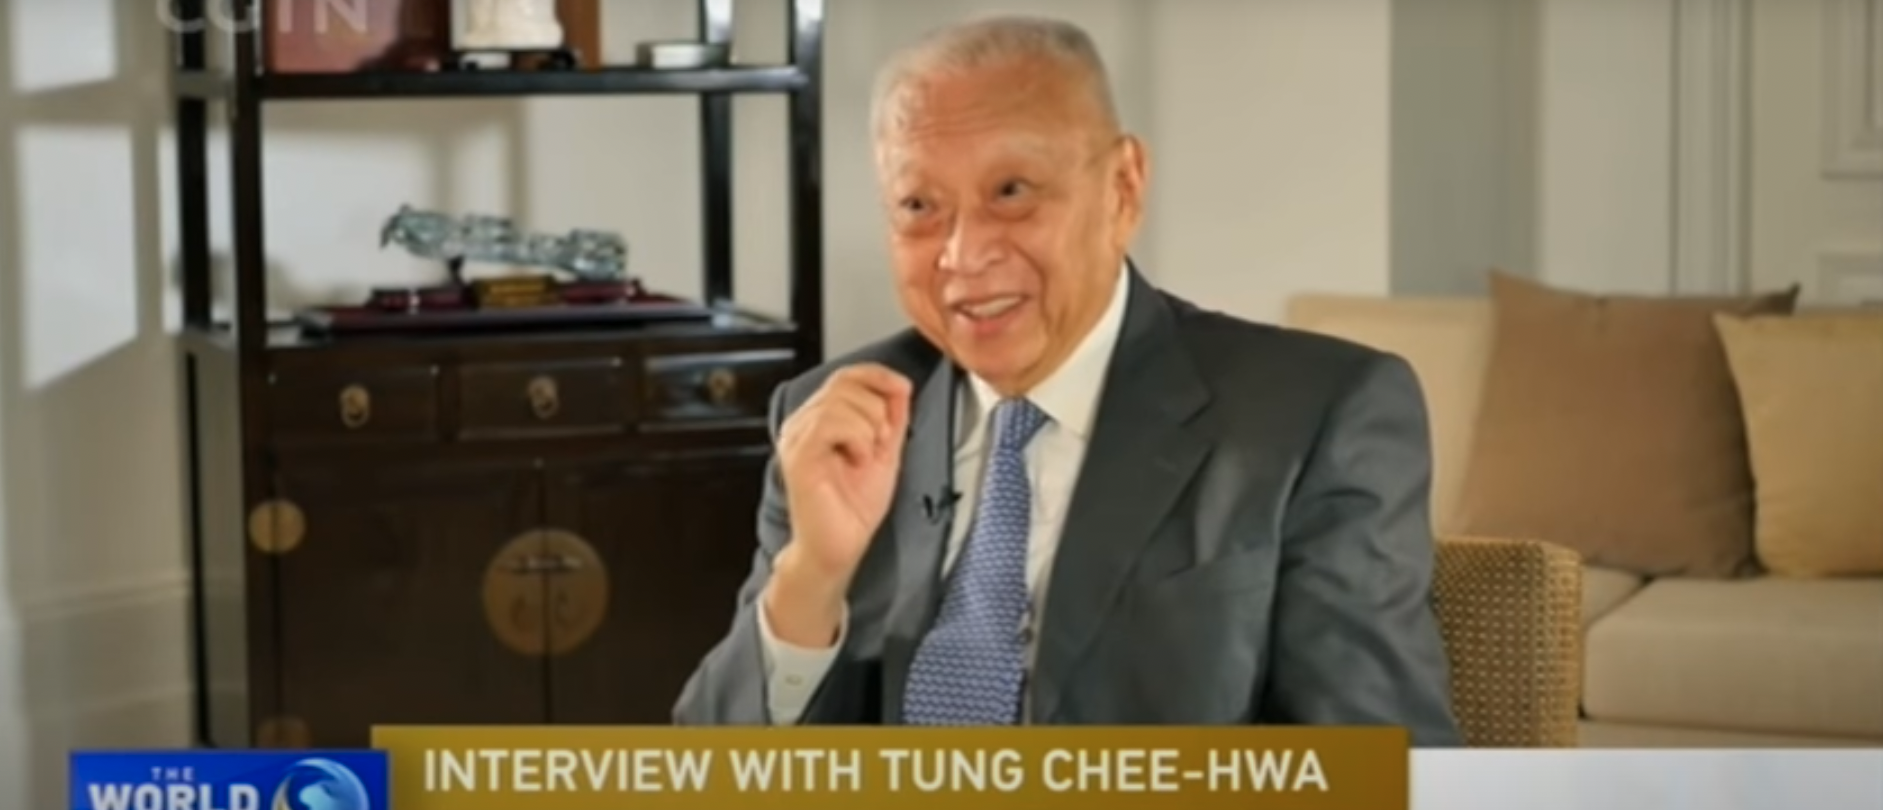 A figure linked to many malign PRC influence operations across the United States, Tung Chee-hwa is the vice chairman of the Chinese Peopleâ€™s Political Consultative Conference (CPPCC), which controls the United Front Work Department (UFWD) to which Chen Xu has been promoted. [YouTube/Screenshot/CGTN]